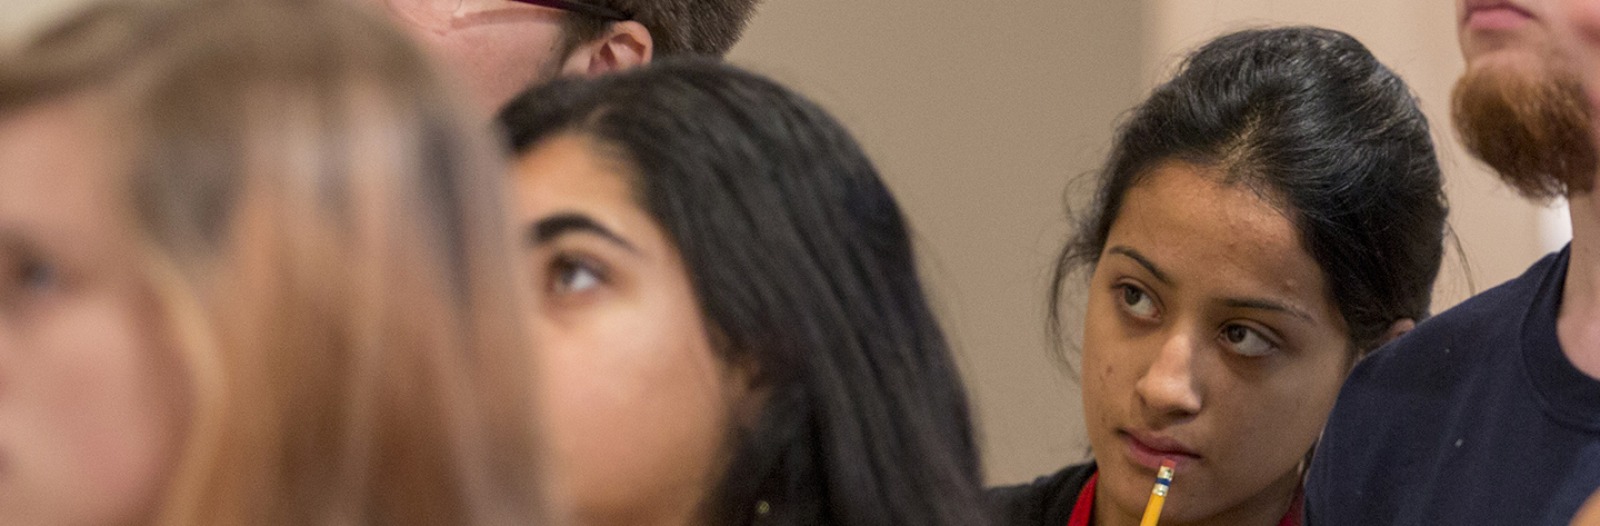 Close-up of a student's face as she stands among other students, all looking intent